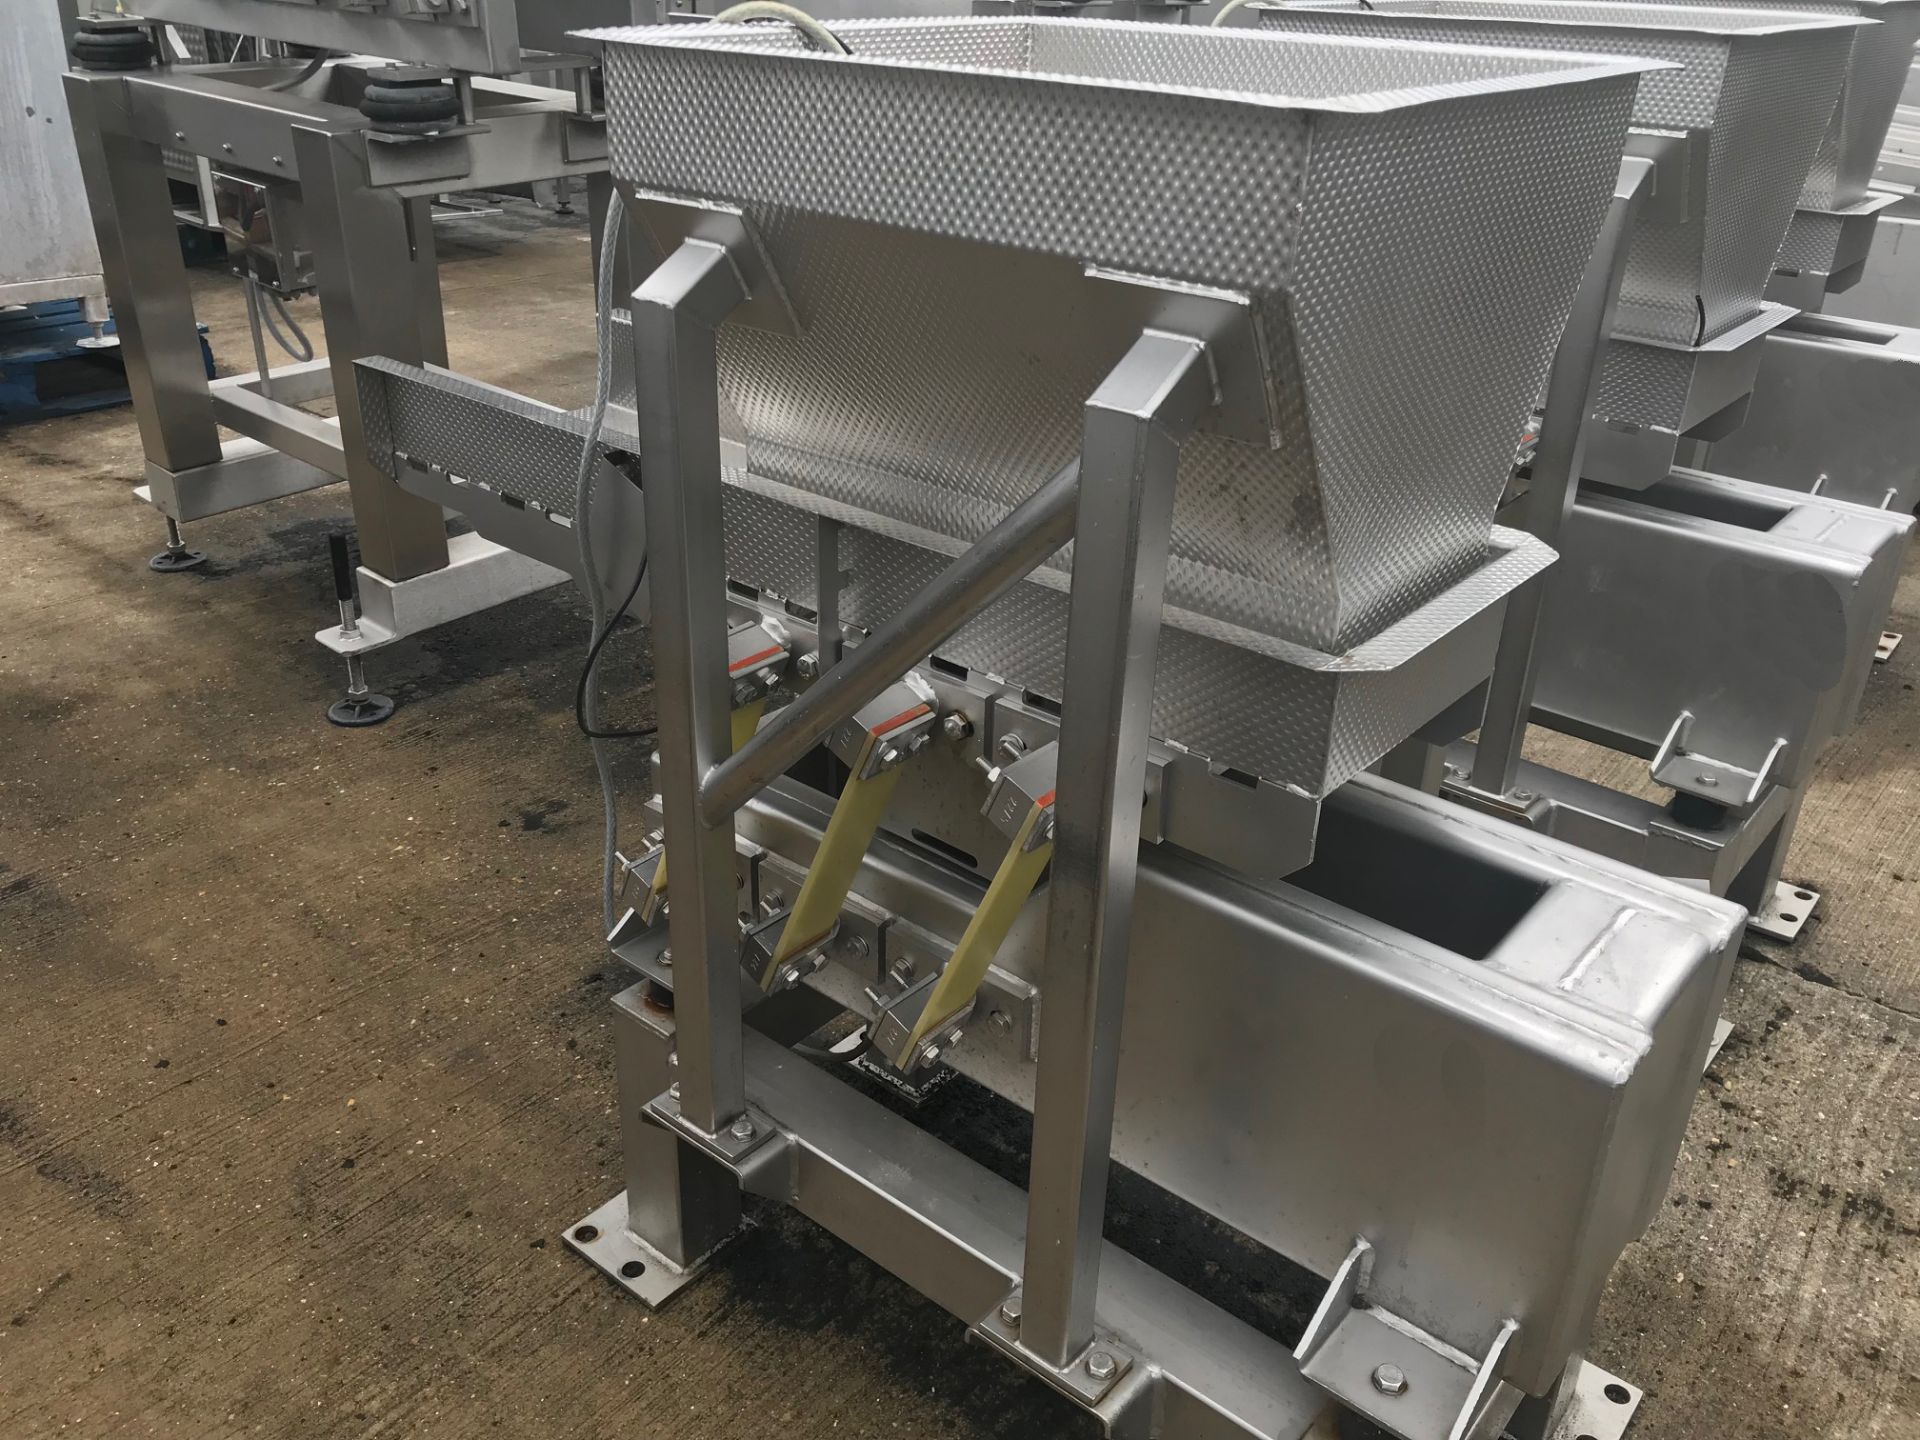 Stainless Steel Vibratory Feeder, with infeed chut - Image 2 of 3